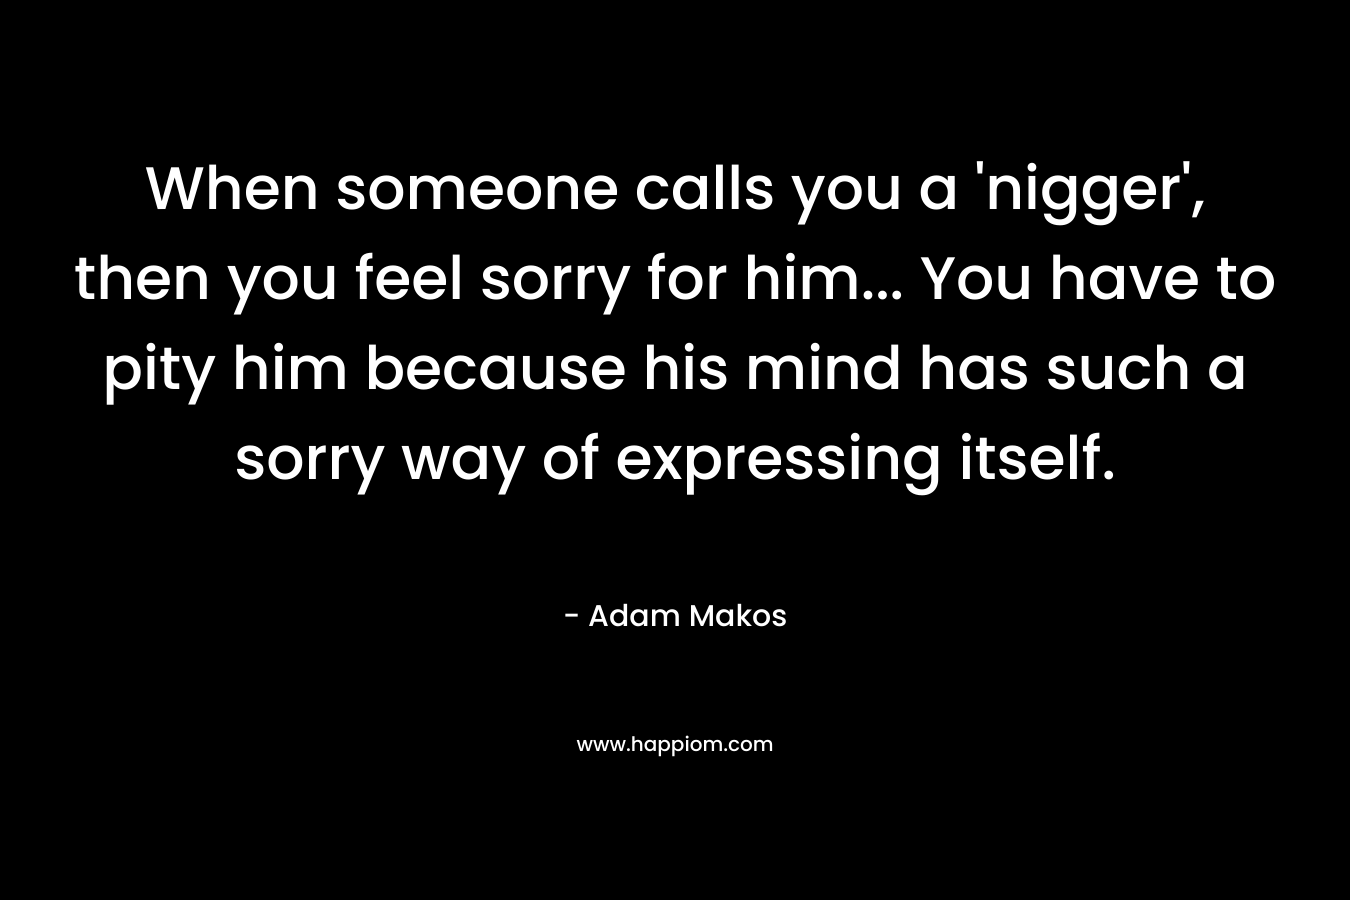 When someone calls you a ‘nigger’, then you feel sorry for him… You have to pity him because his mind has such a sorry way of expressing itself. – Adam Makos